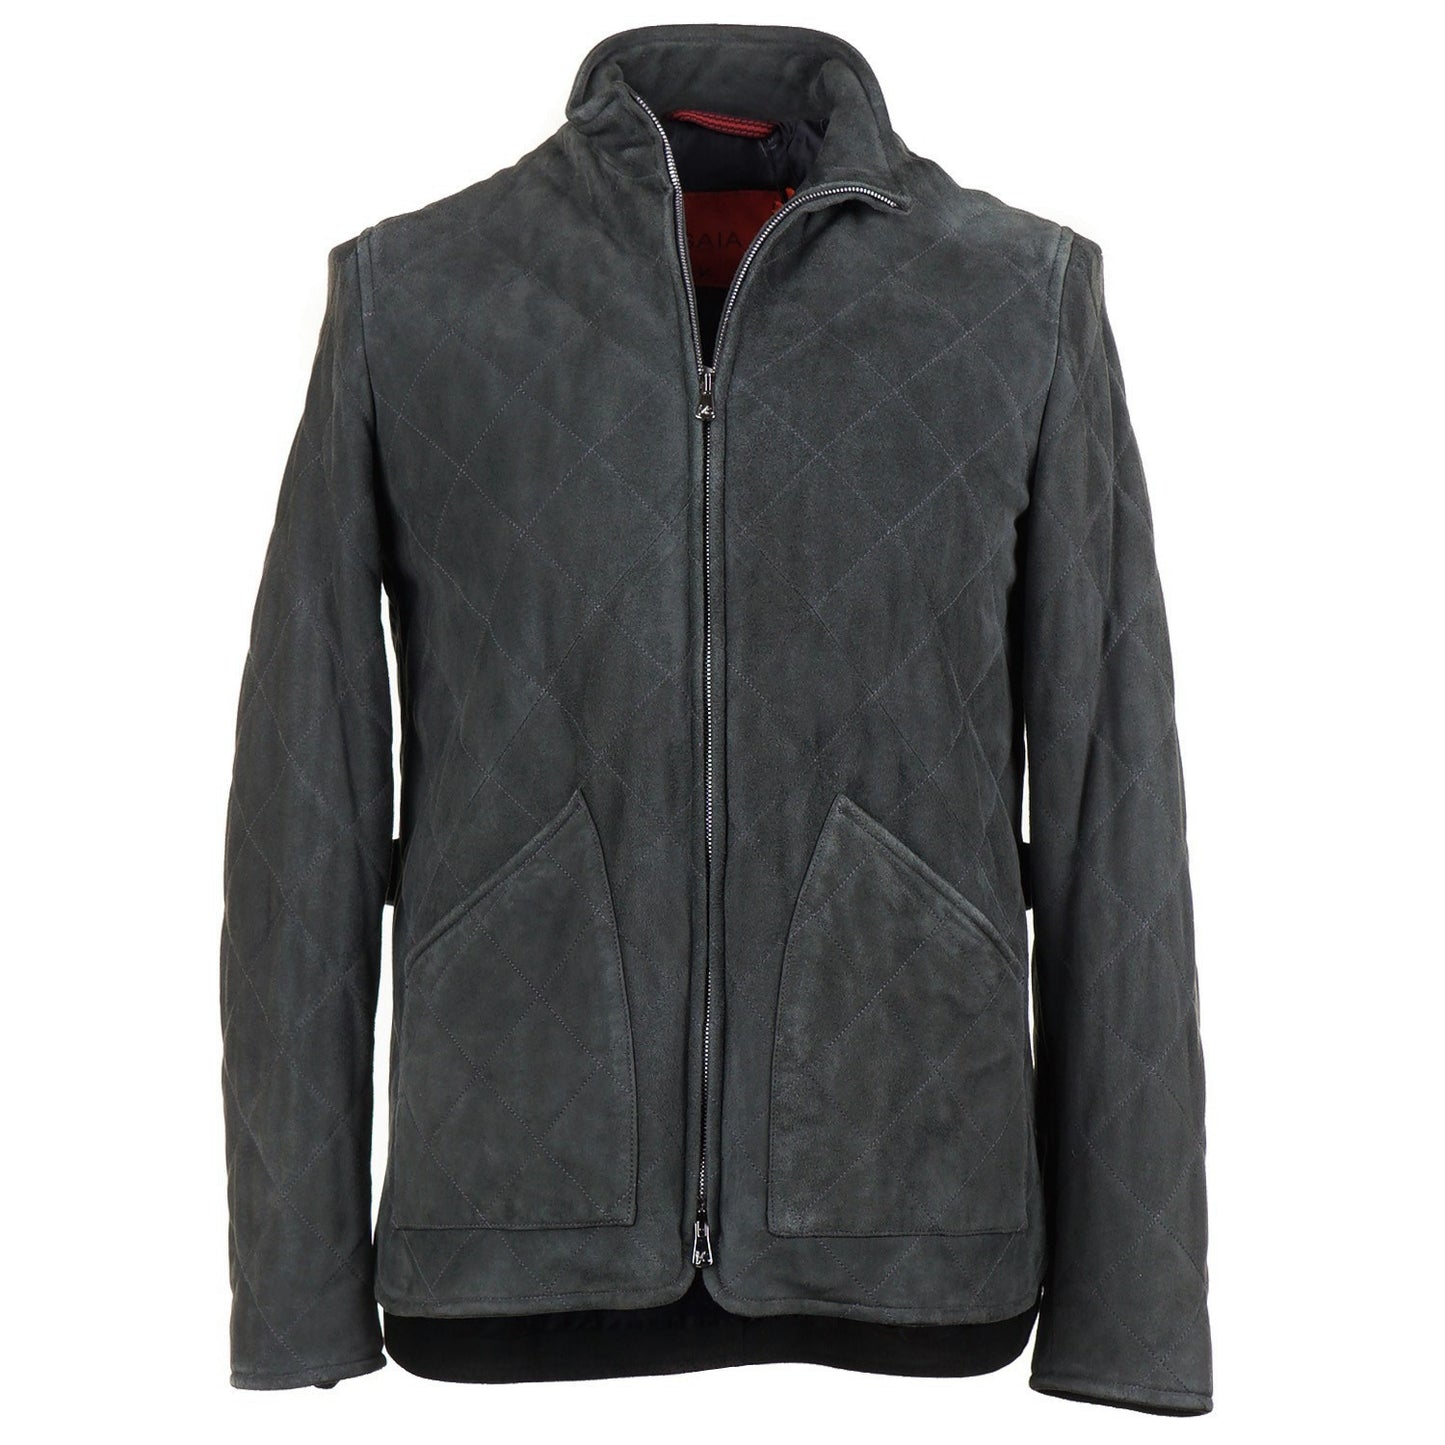 Isaia Quilted Suede Leather Jacket - Top Shelf Apparel